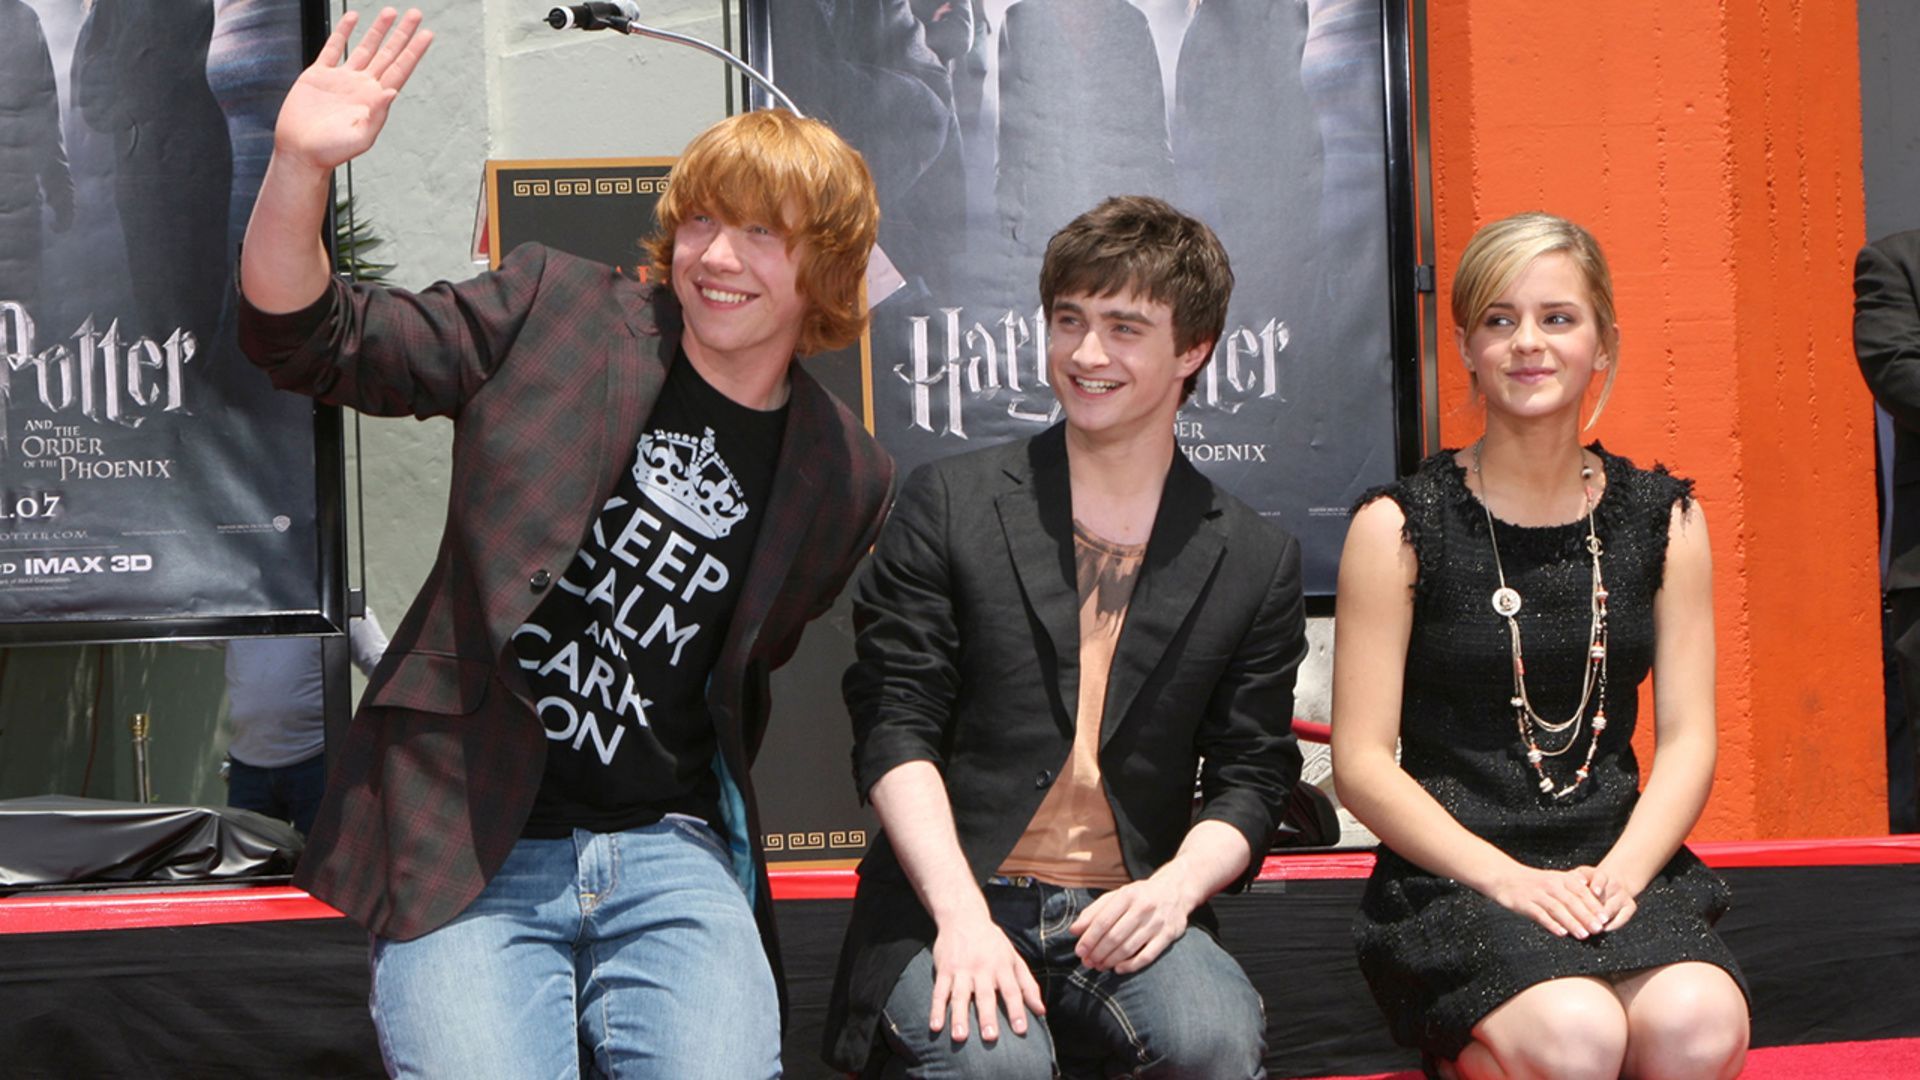 The Cast of “Harry Potter”: Then and Now: Some of your favorite stars from the Harry Potter series like Daniel Radcliffe, Emma